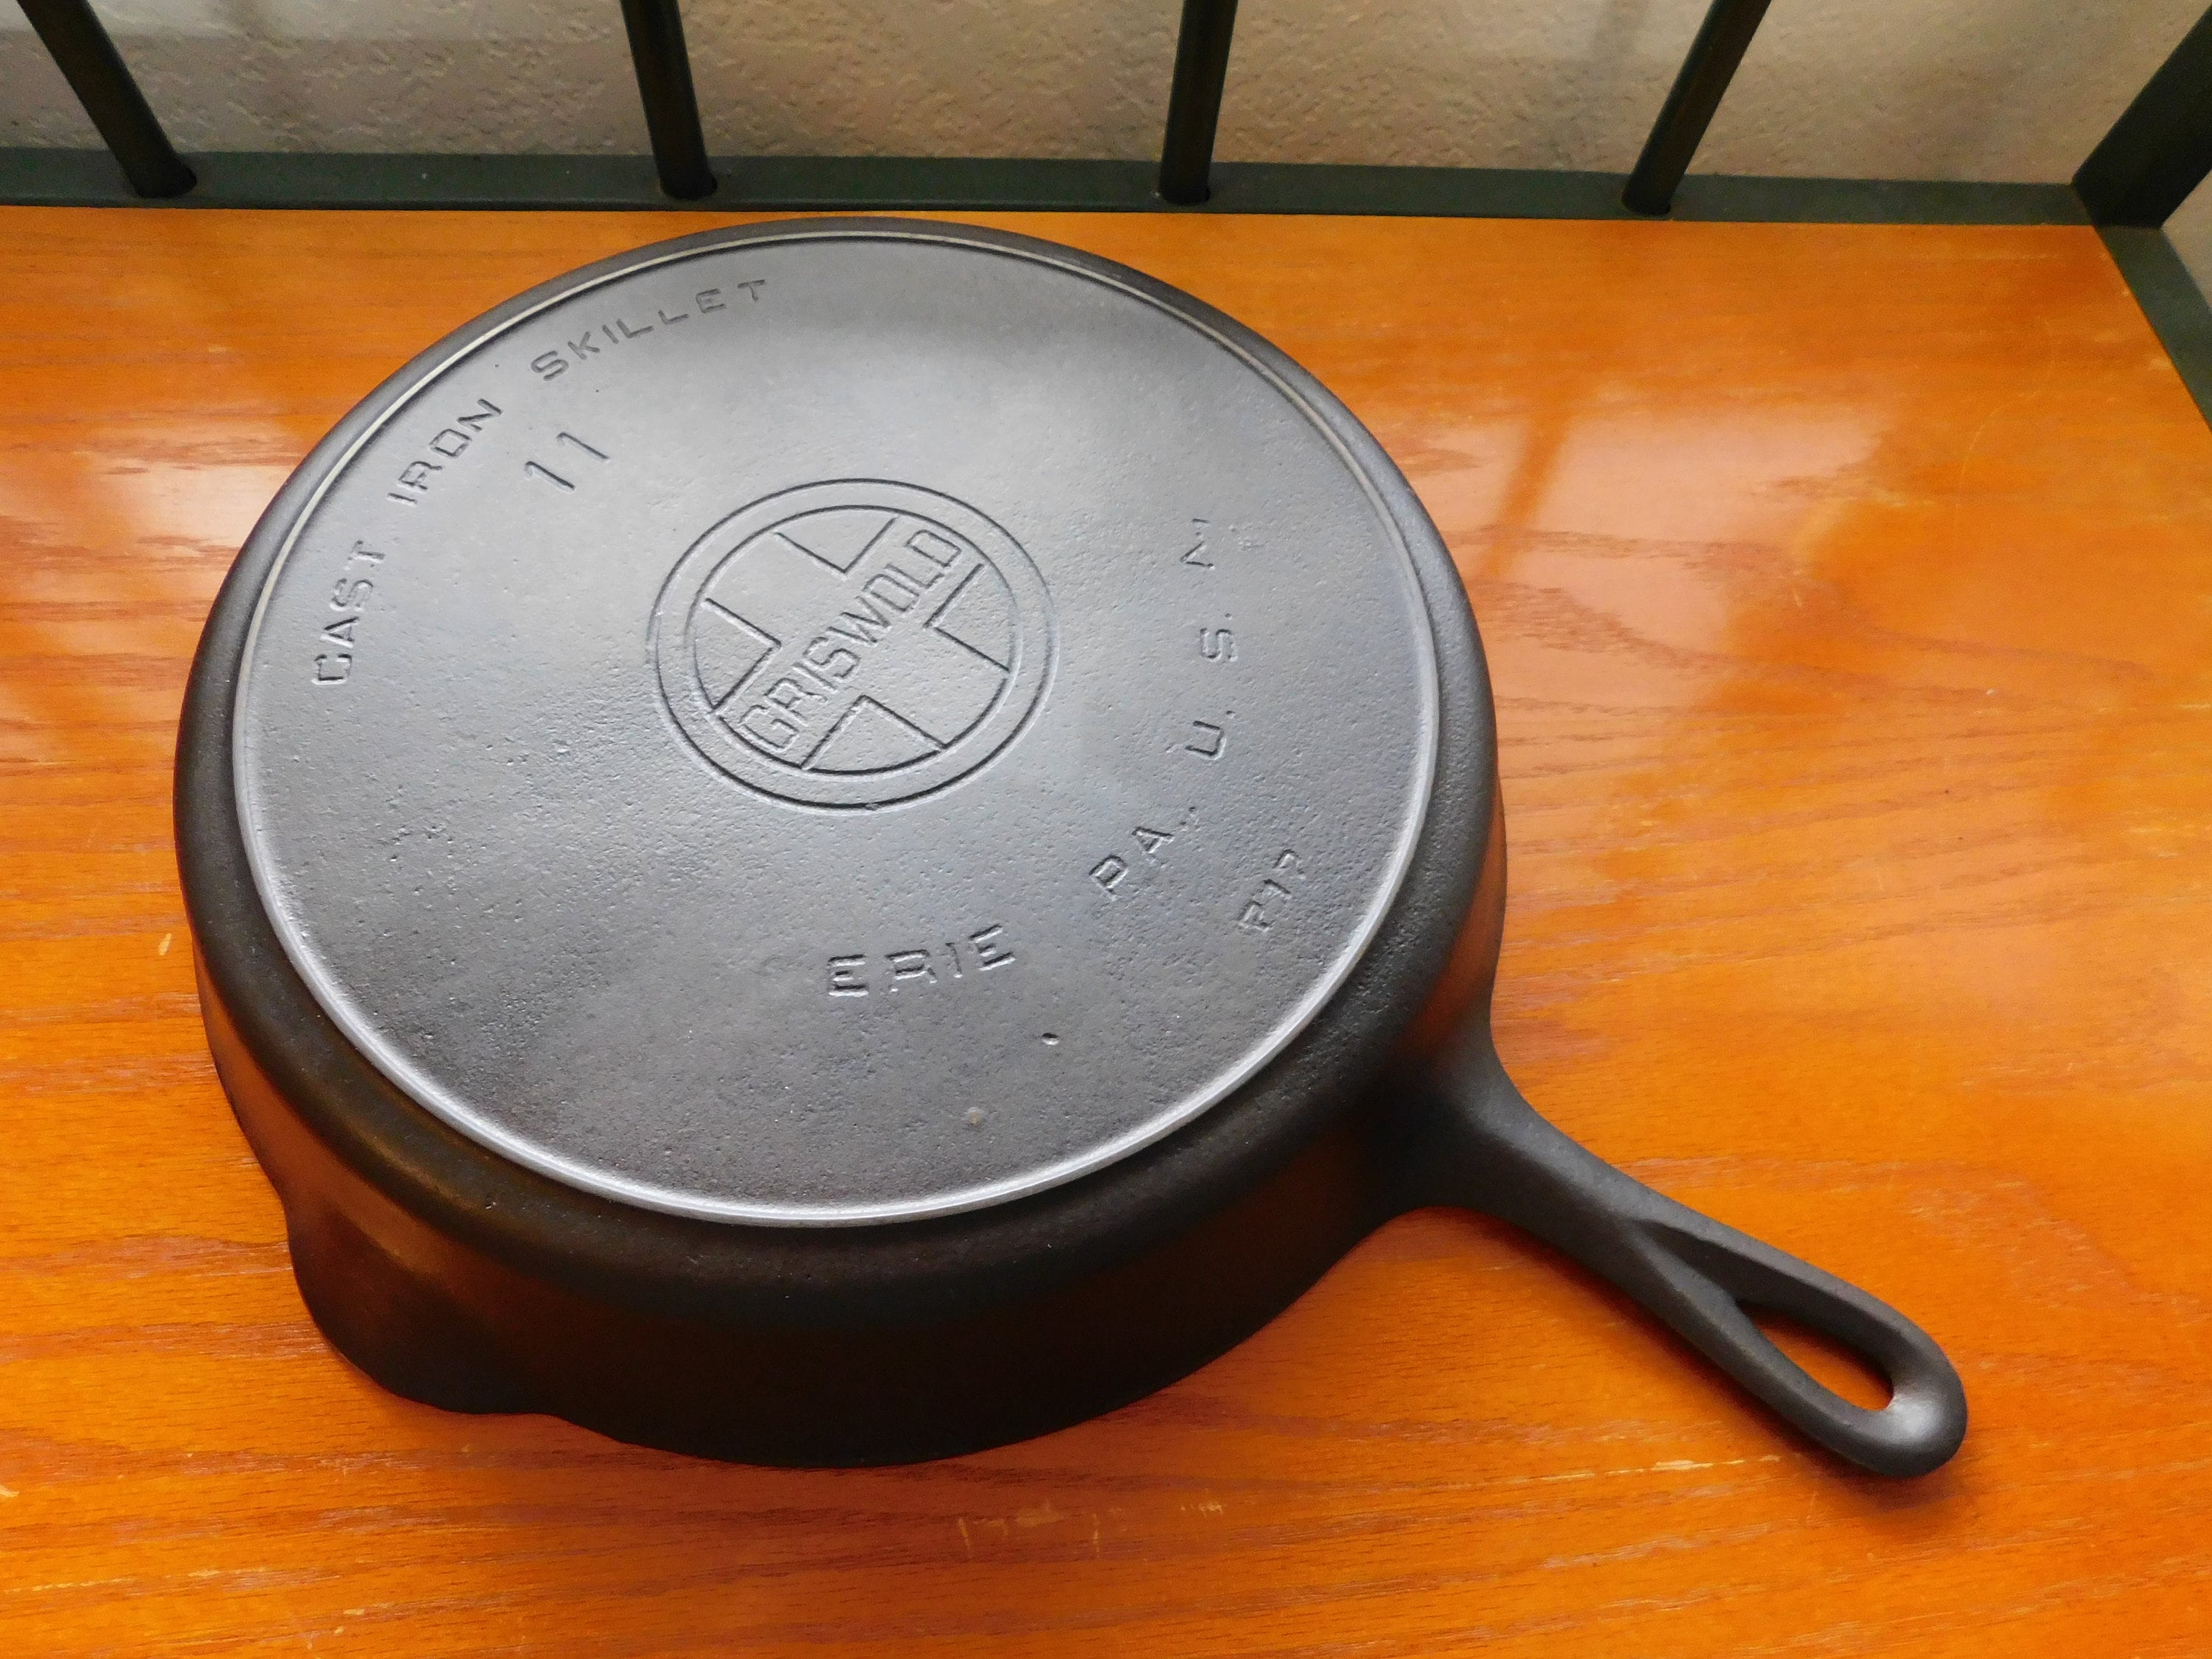 VTG No 11BG Cast Iron 11 1/4 Inch Breakfast Griddle Fry Pan Skillet Made In  USA